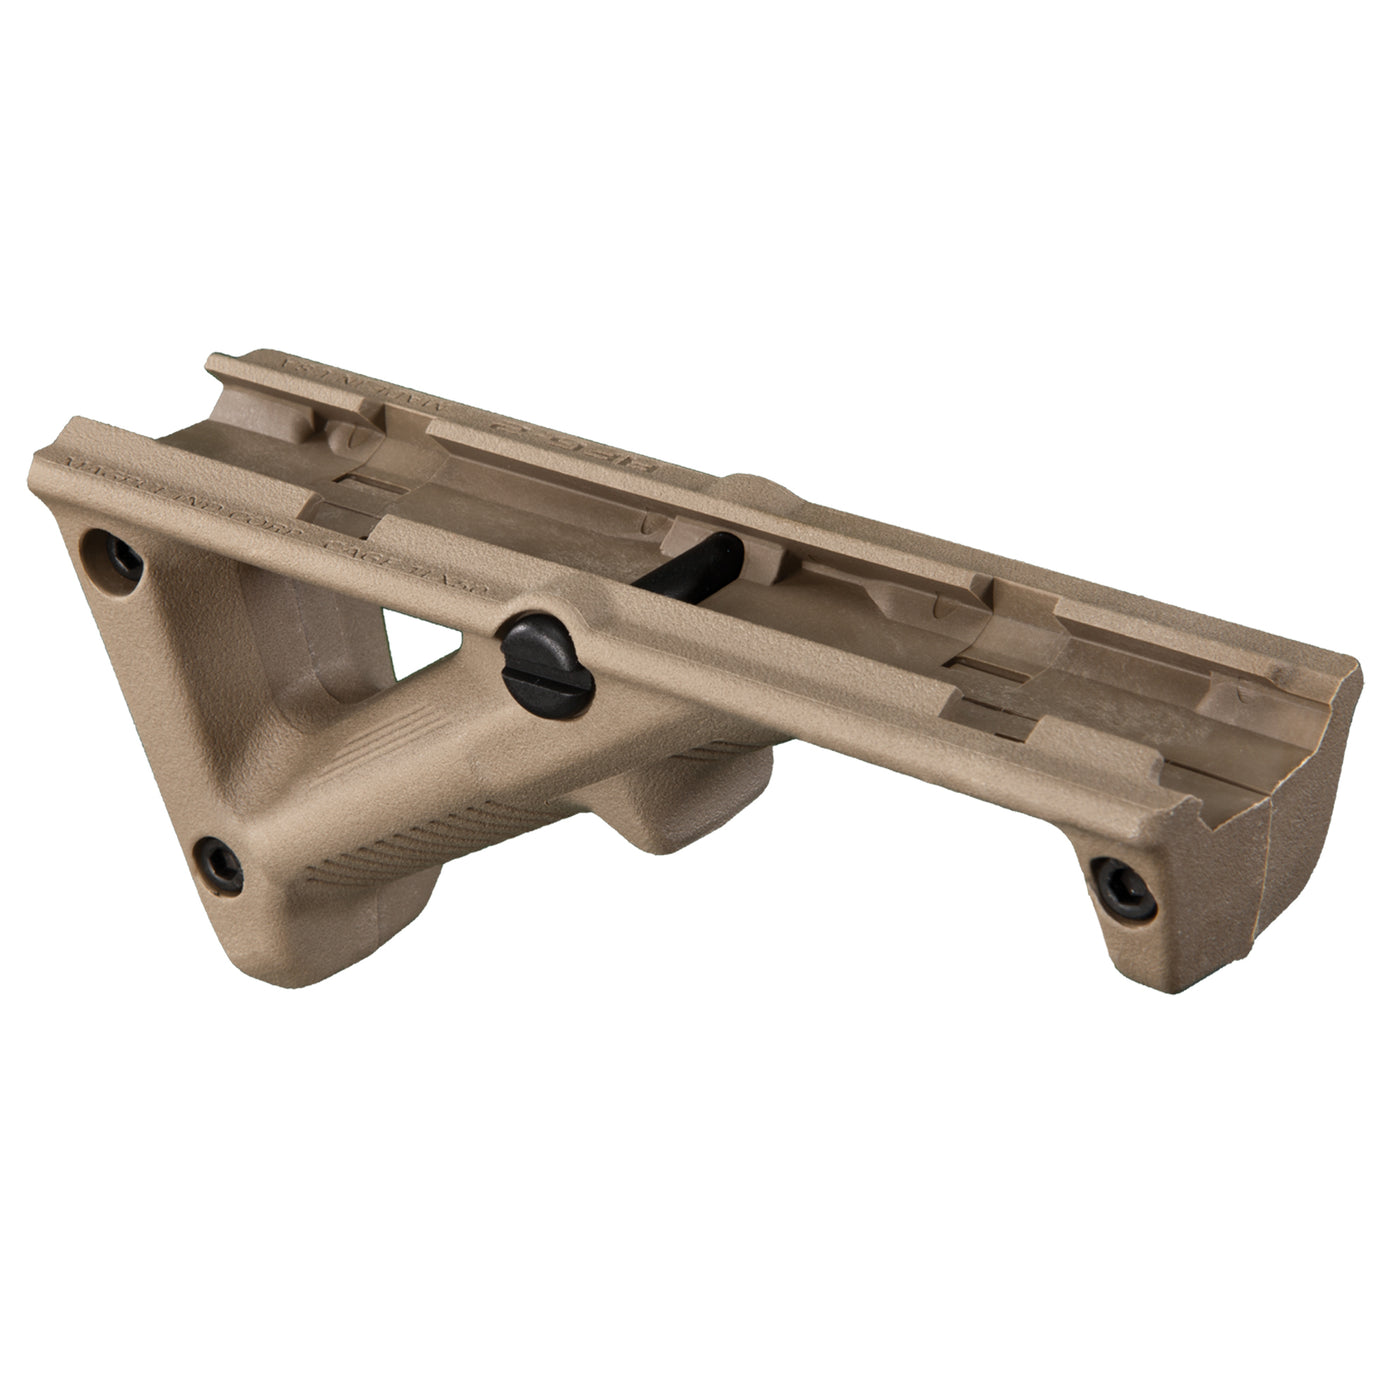 Magpul Angled Fore Grip Afg2 - Picatinny Mount Fde